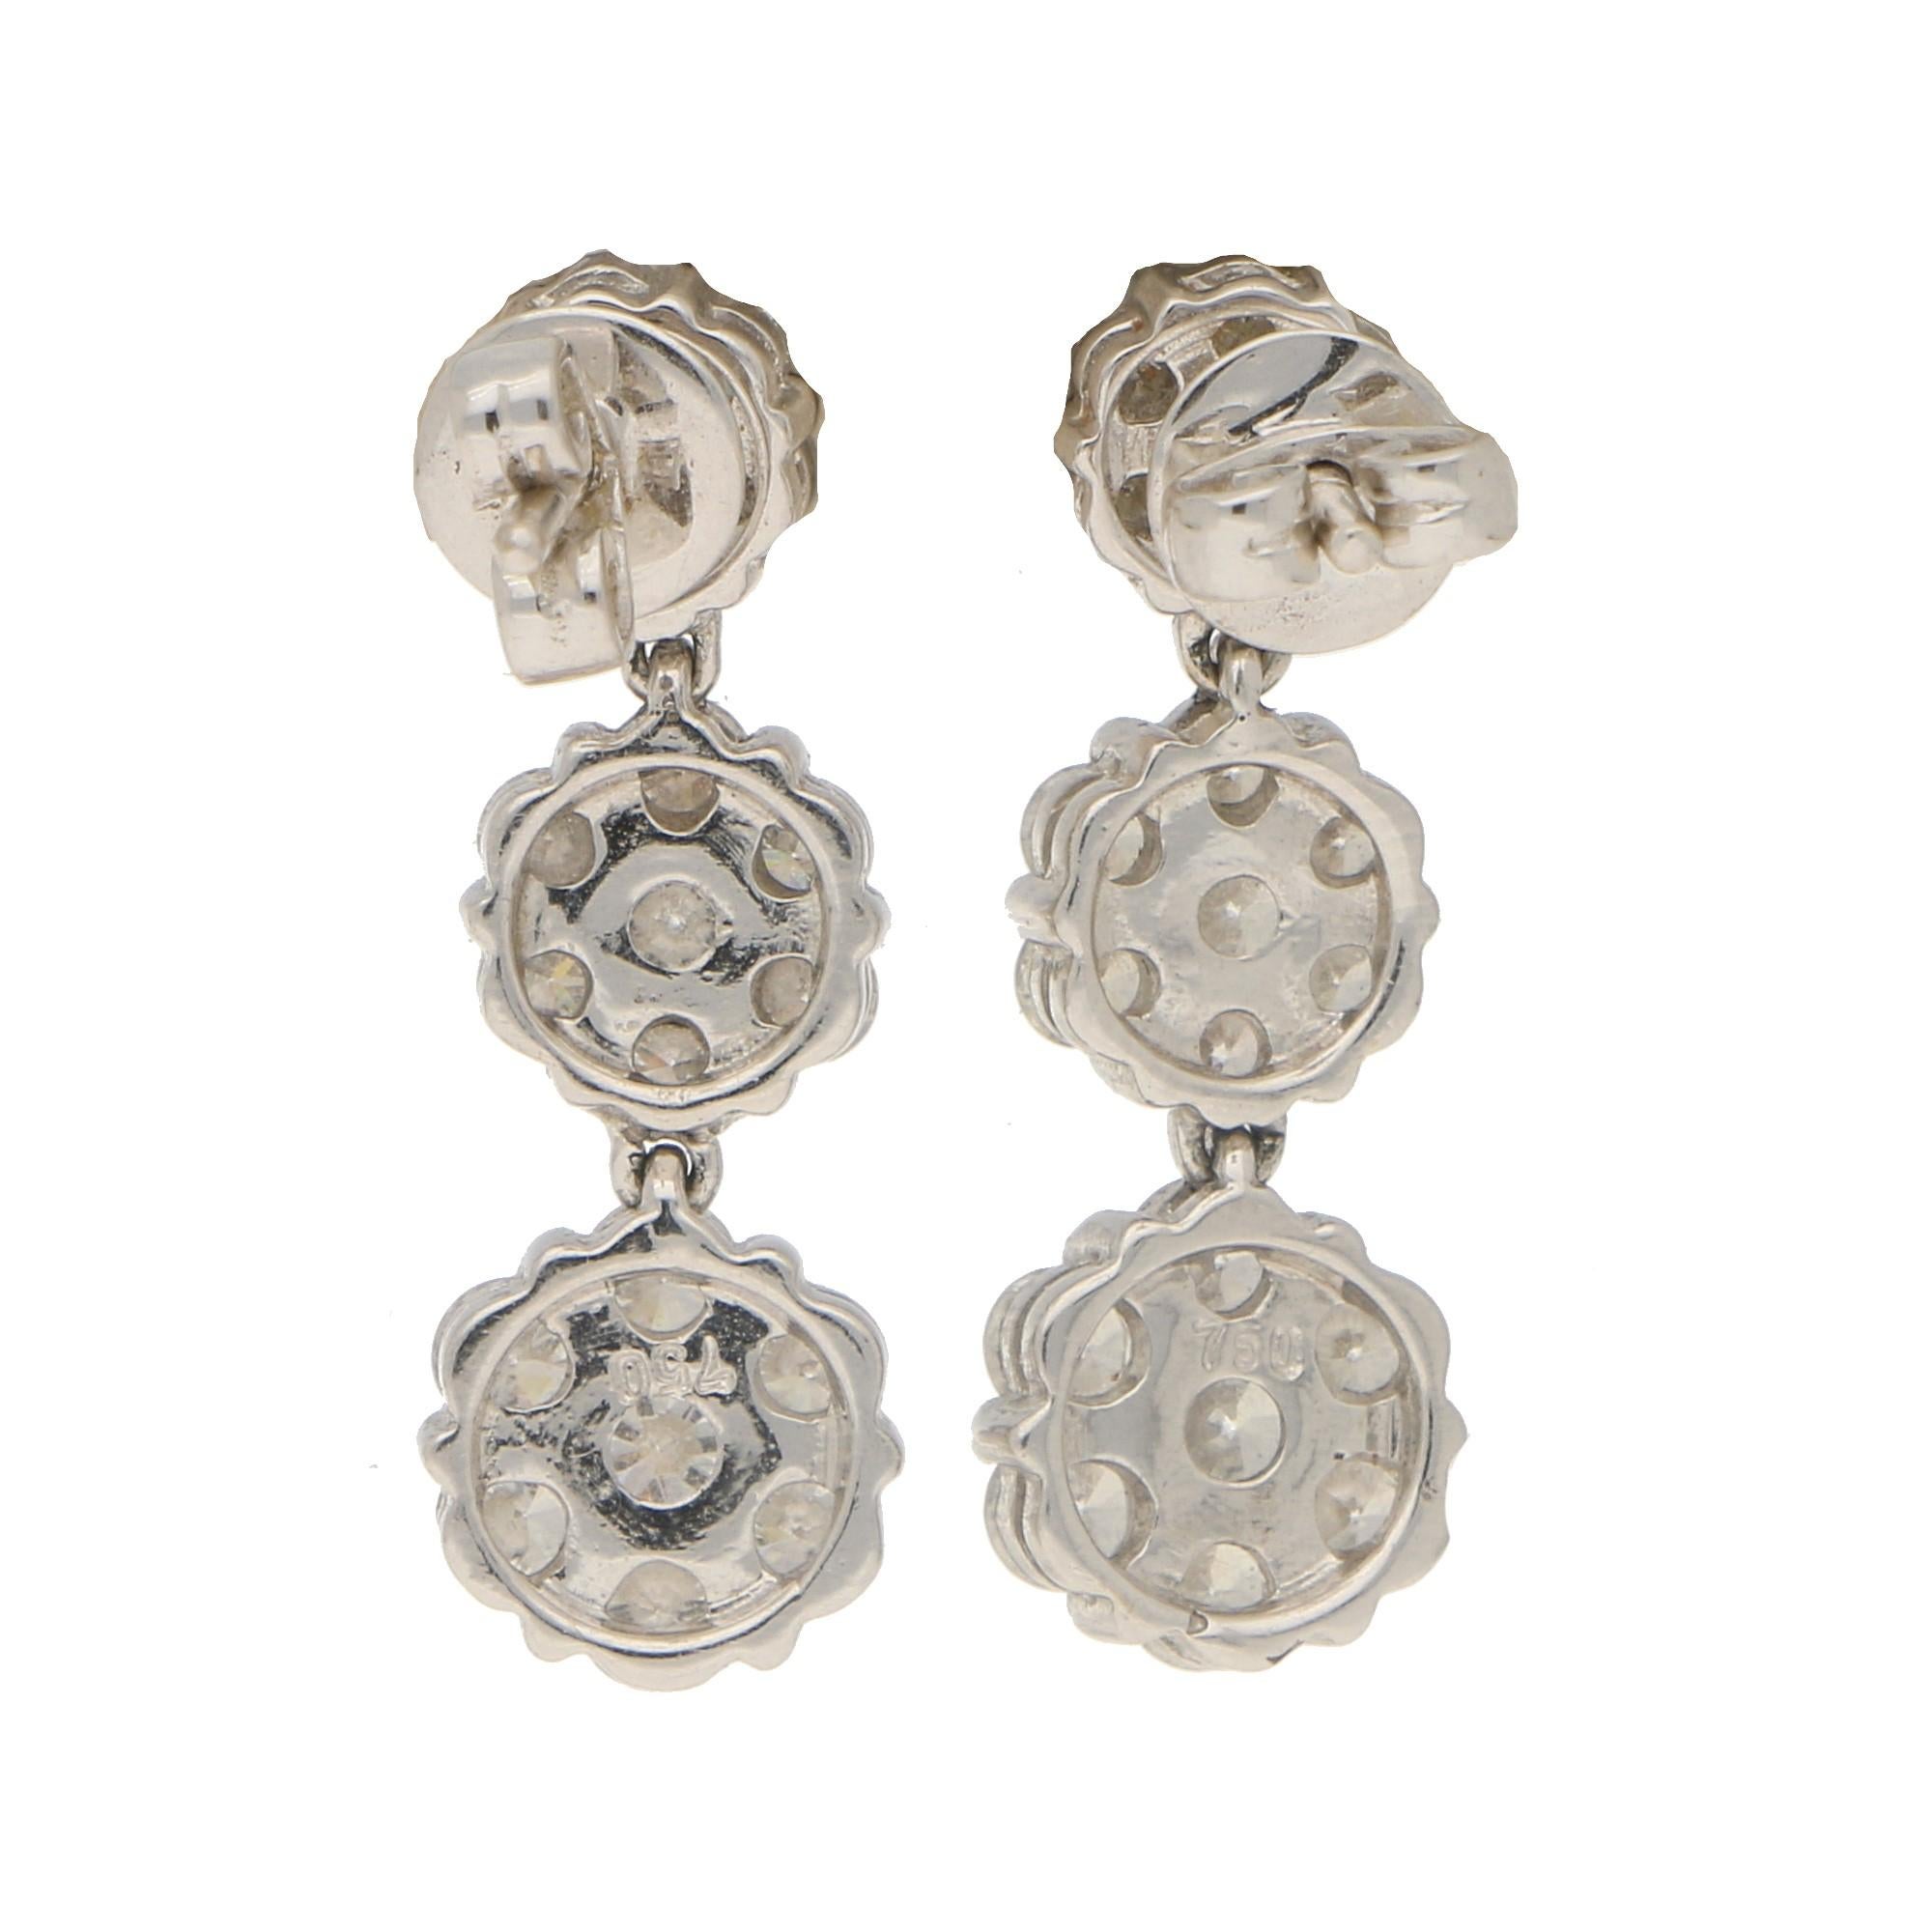 A beautiful little pair of diamond floral cluster drop earrings set in 18k white gold. Each earring is composed of three graduating floral clusters each connected by an articulated hoop allowing the drops to move nicely once on the ear. Each cluster